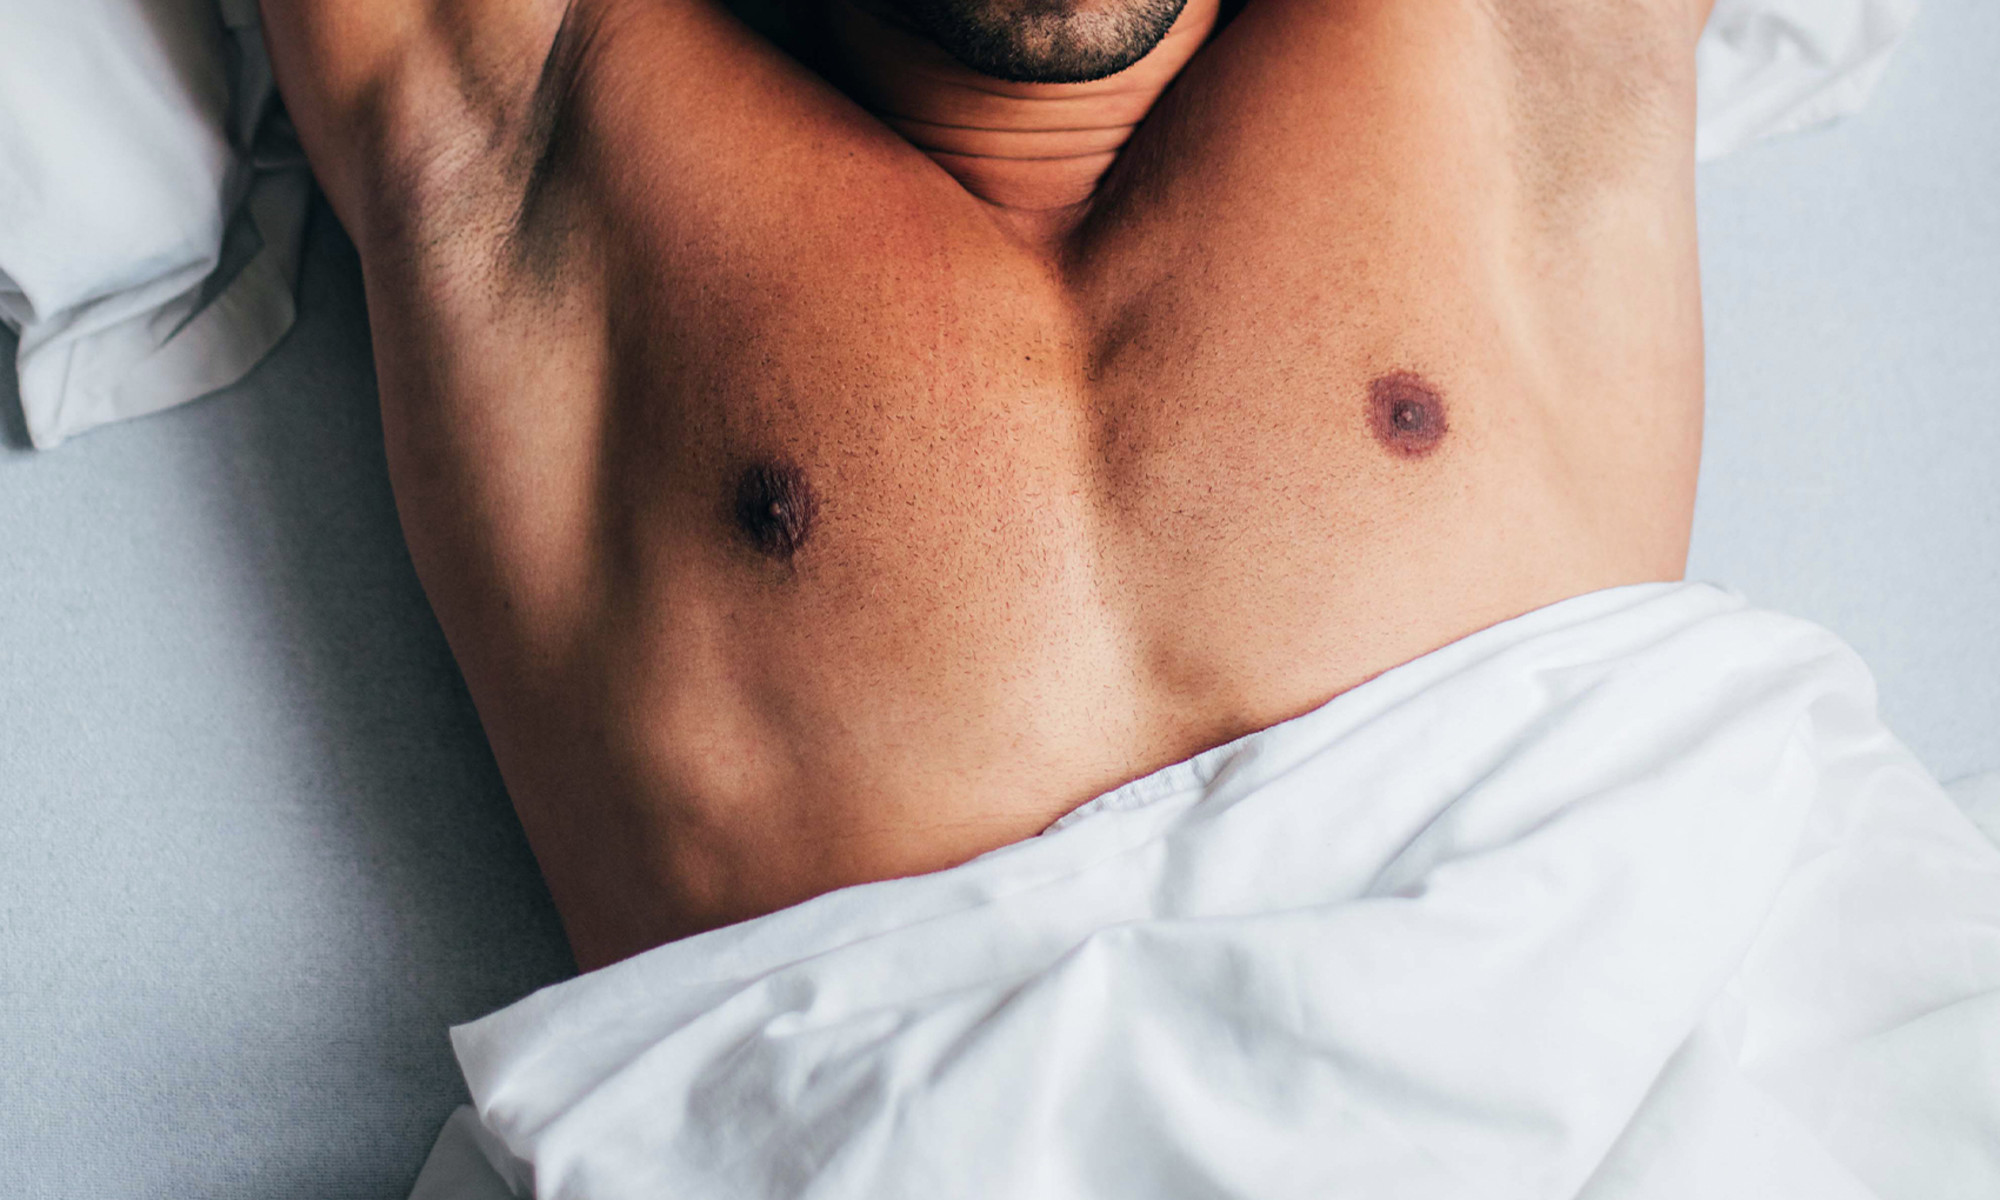 How To Use Male Nipple Play In Bed 17 Techniques and FAQs mindbodygreen pic